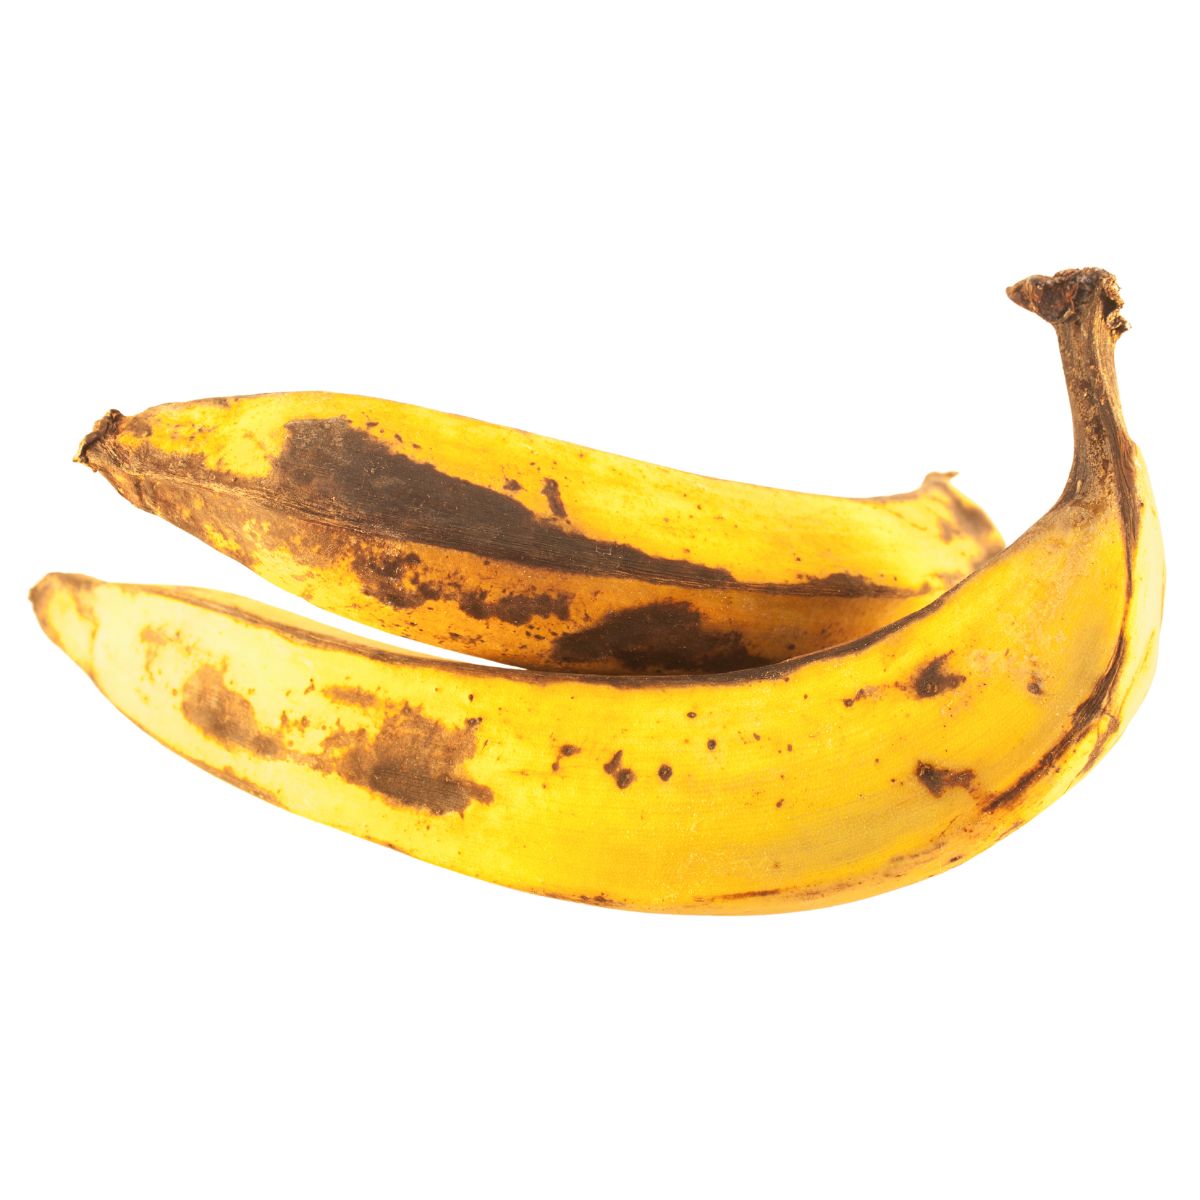 Two overripe Plantain - Each with brown spots isolated on a white background.